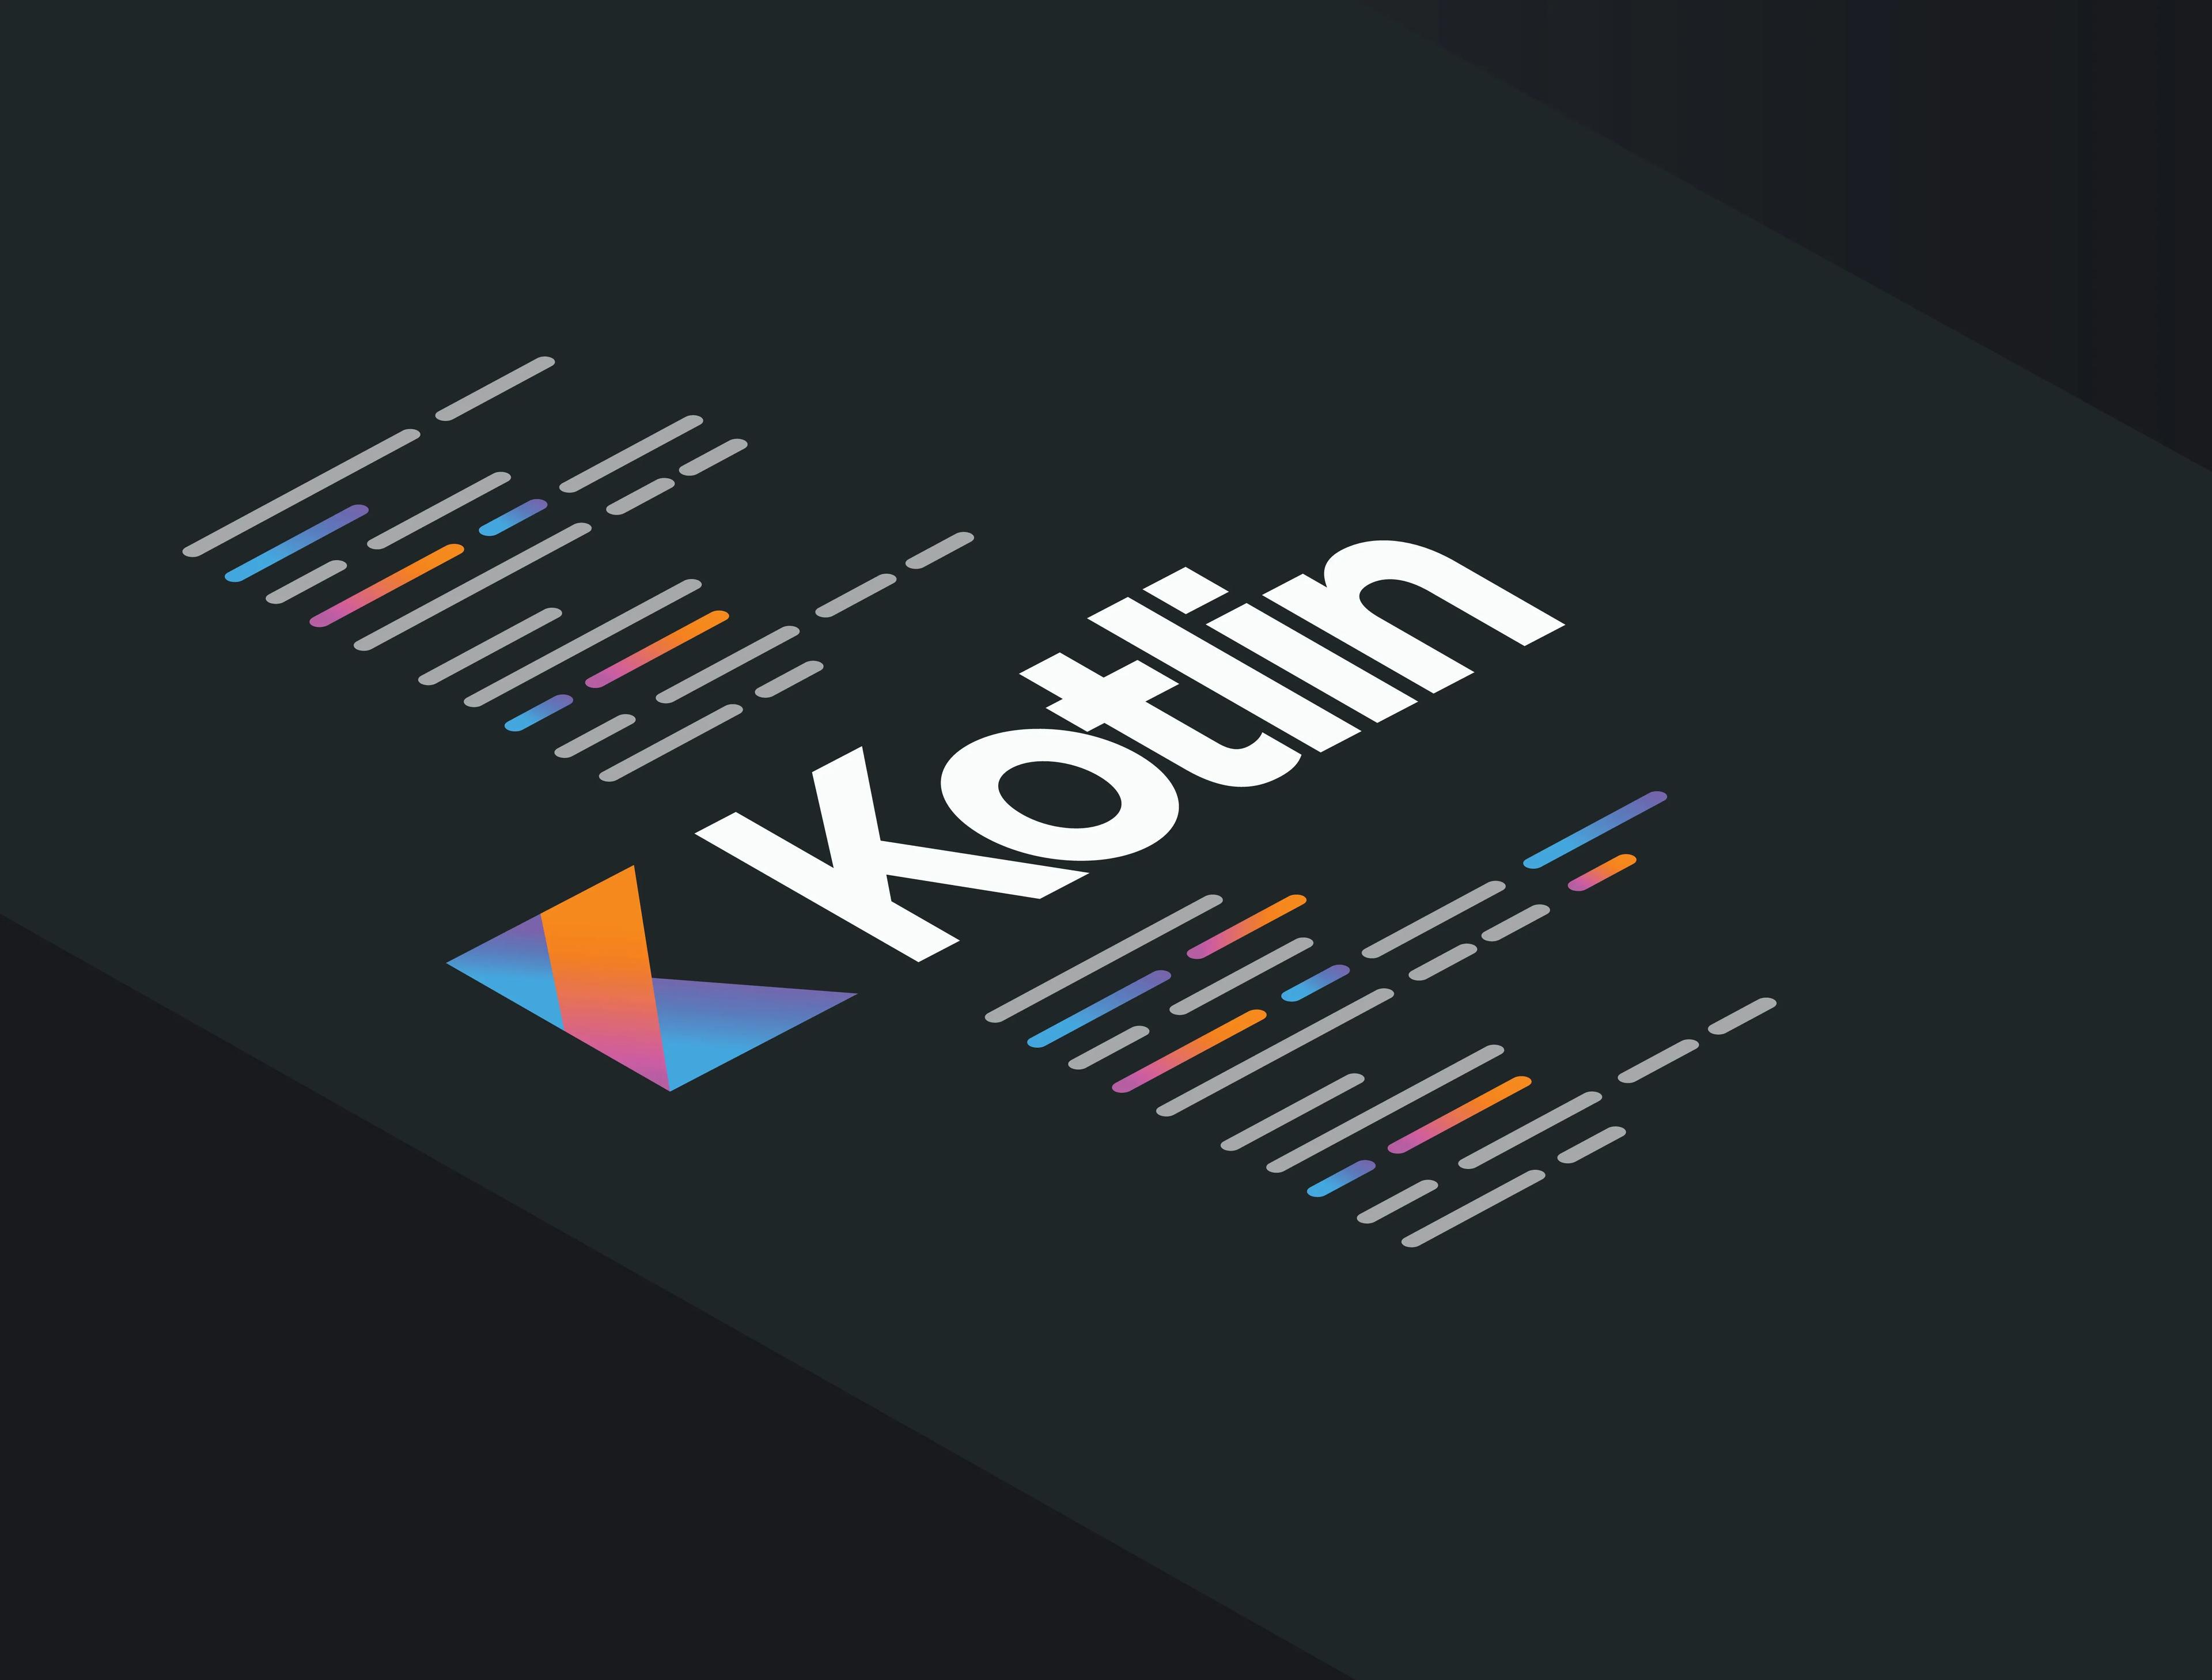 Hire Kotlin Developers: 7 Tips You Must Know in 2022